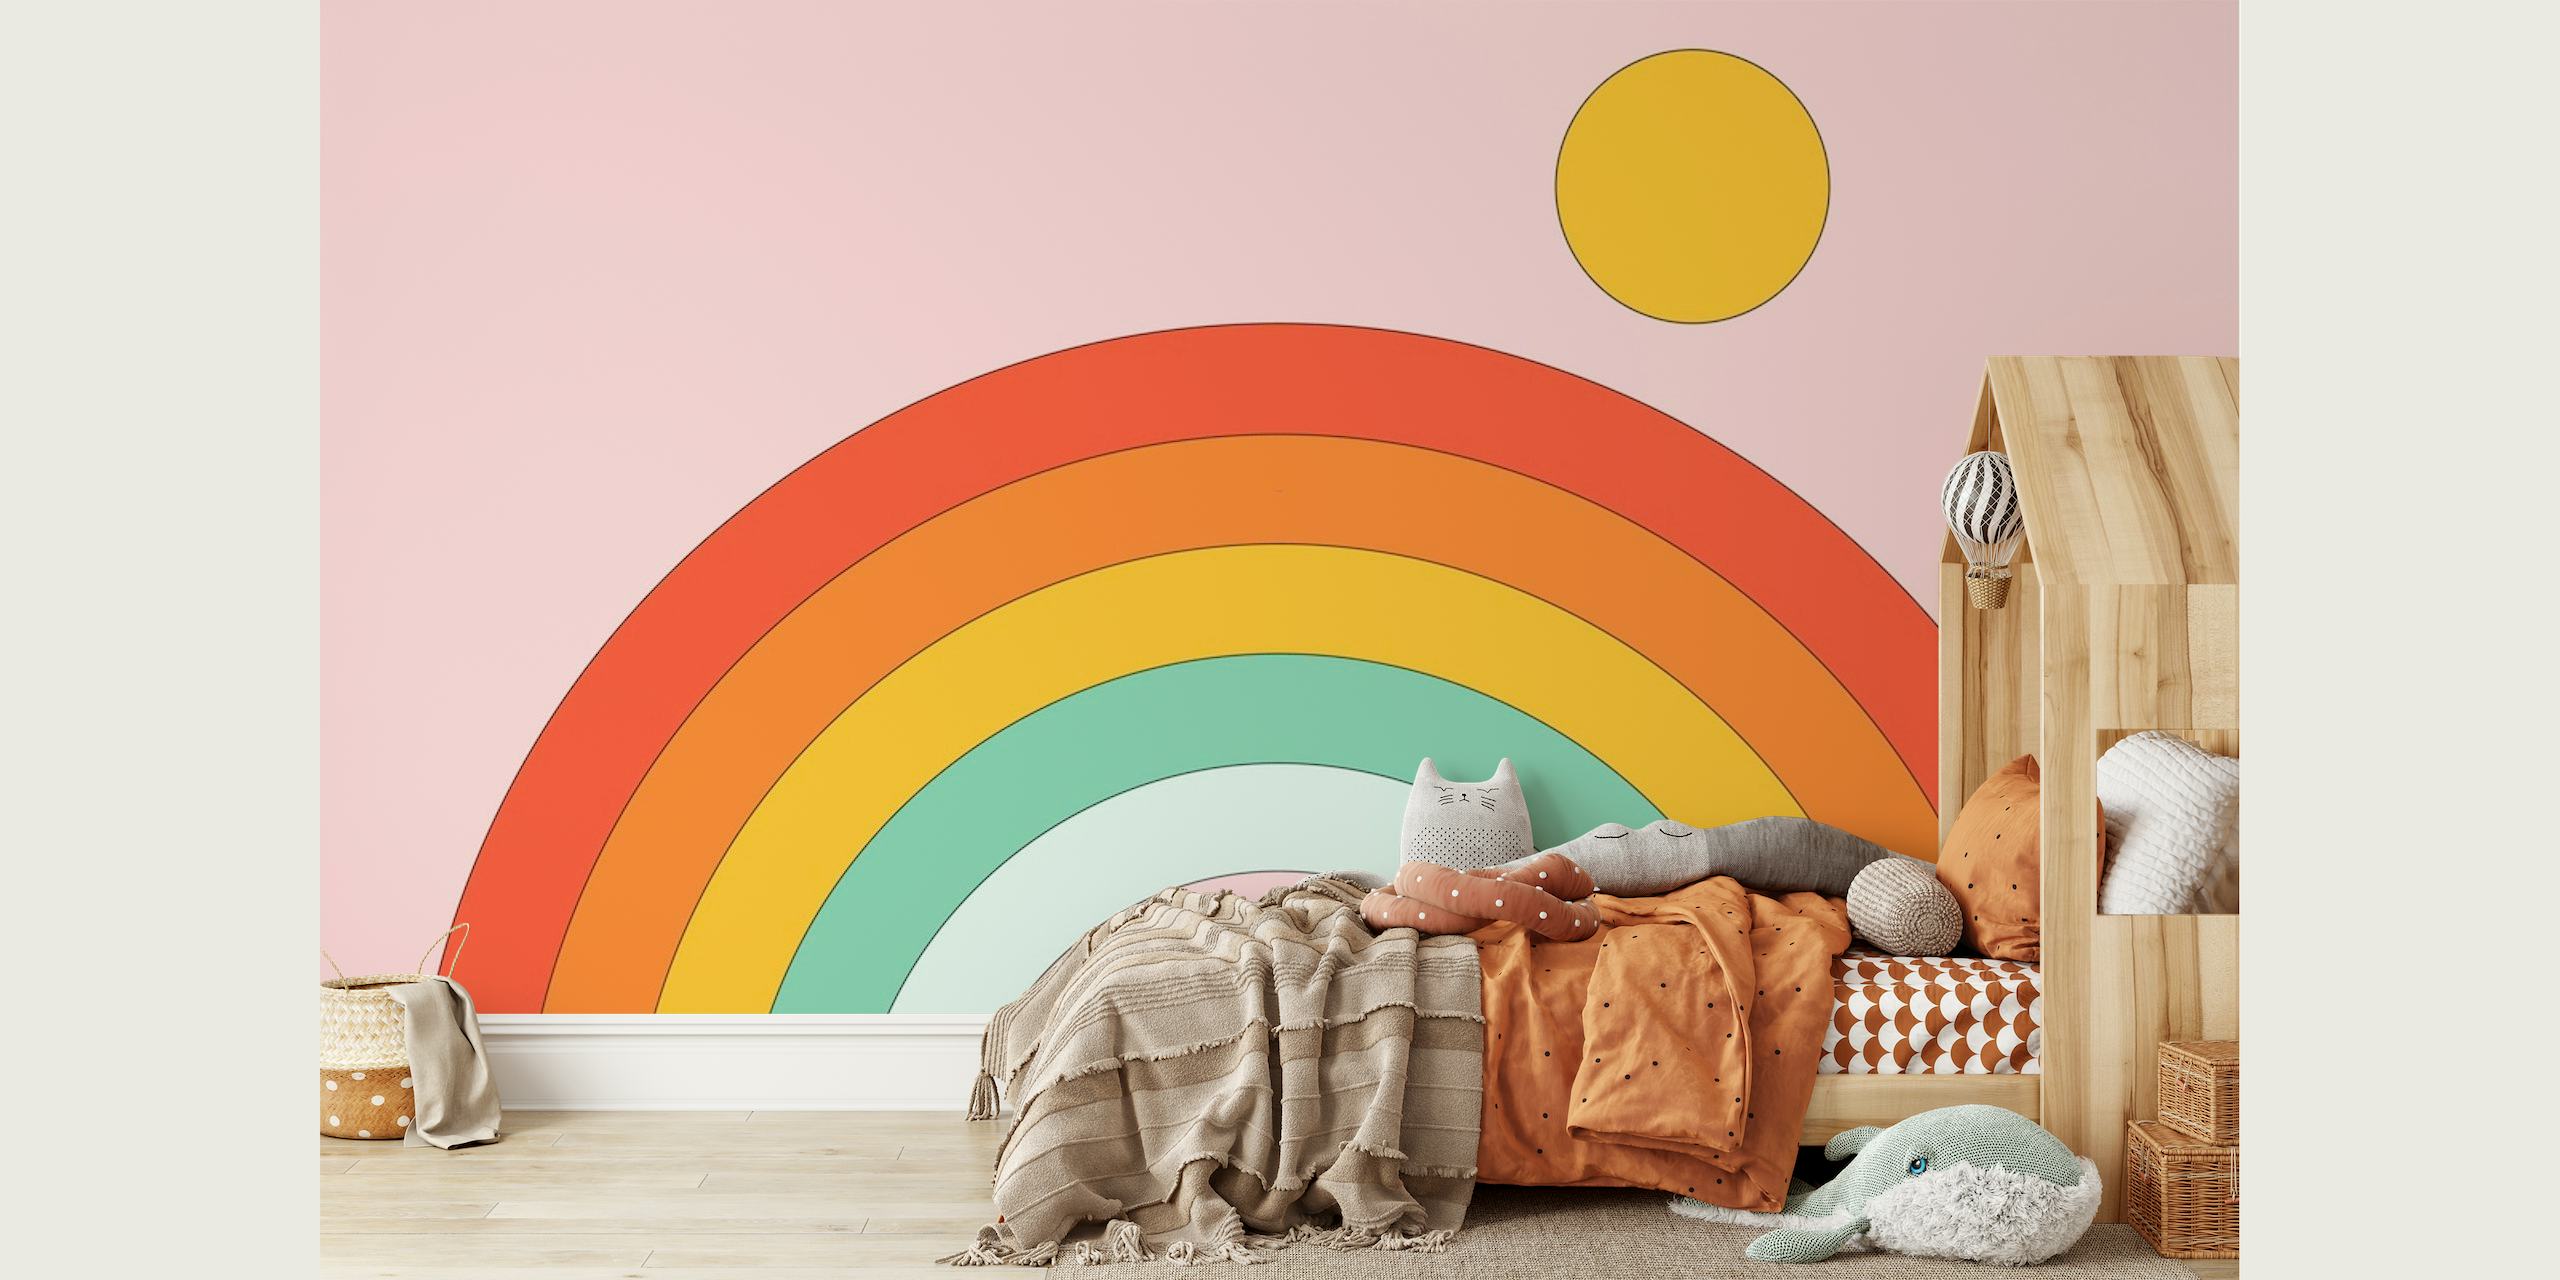 Colorful retro-style rainbow wall mural on a pink background